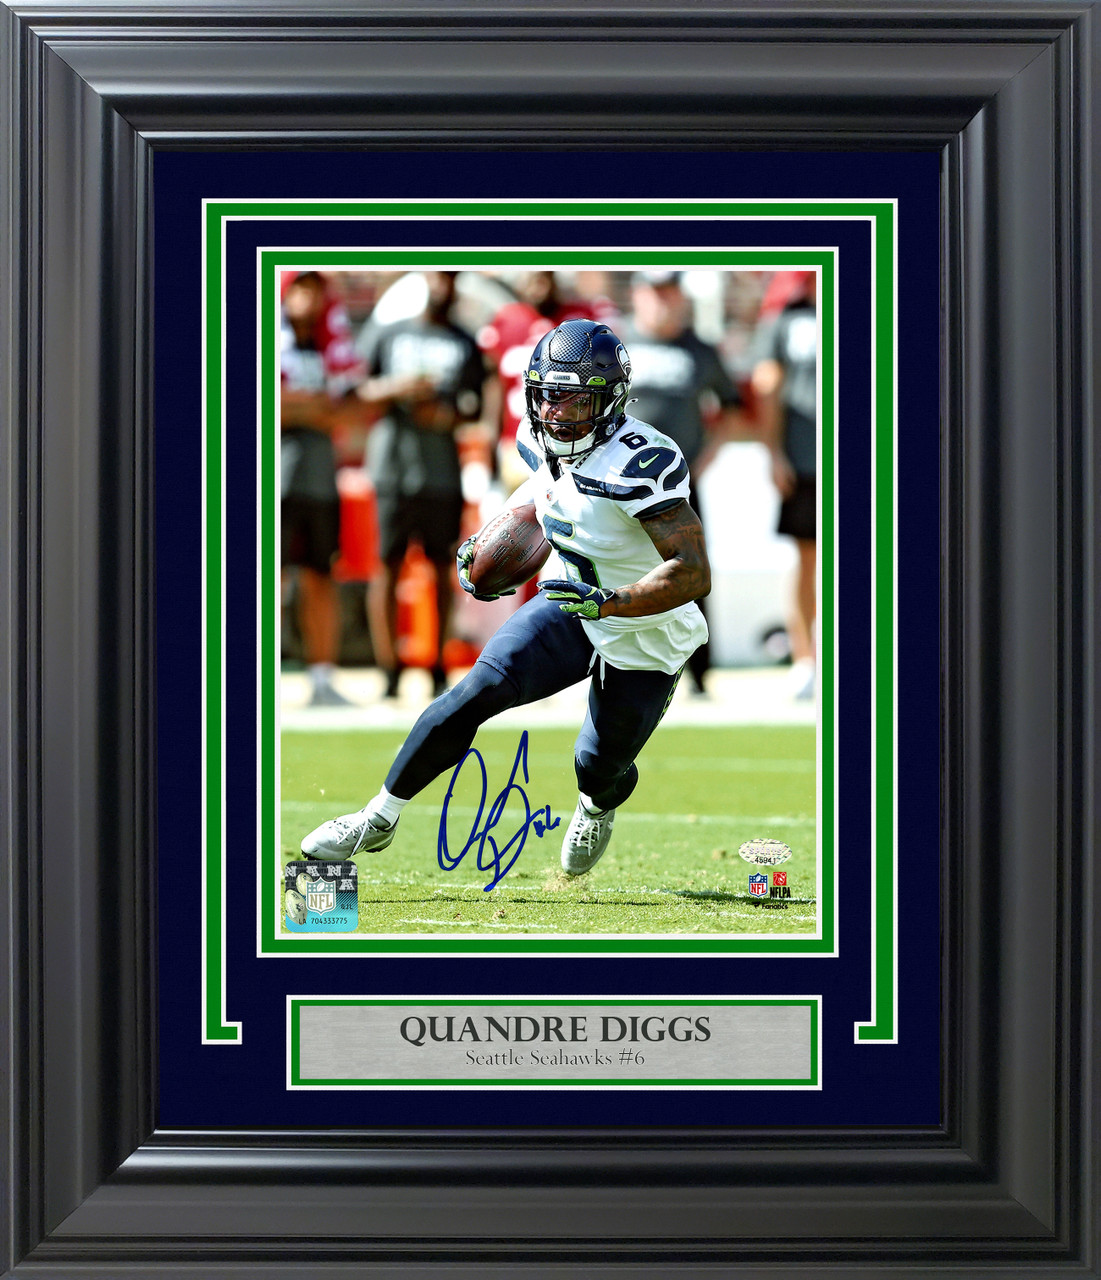 Quandre Diggs Autographed Framed 8x10 Photo Seattle Seahawks MCS Holo Stock  #209005 - Mill Creek Sports